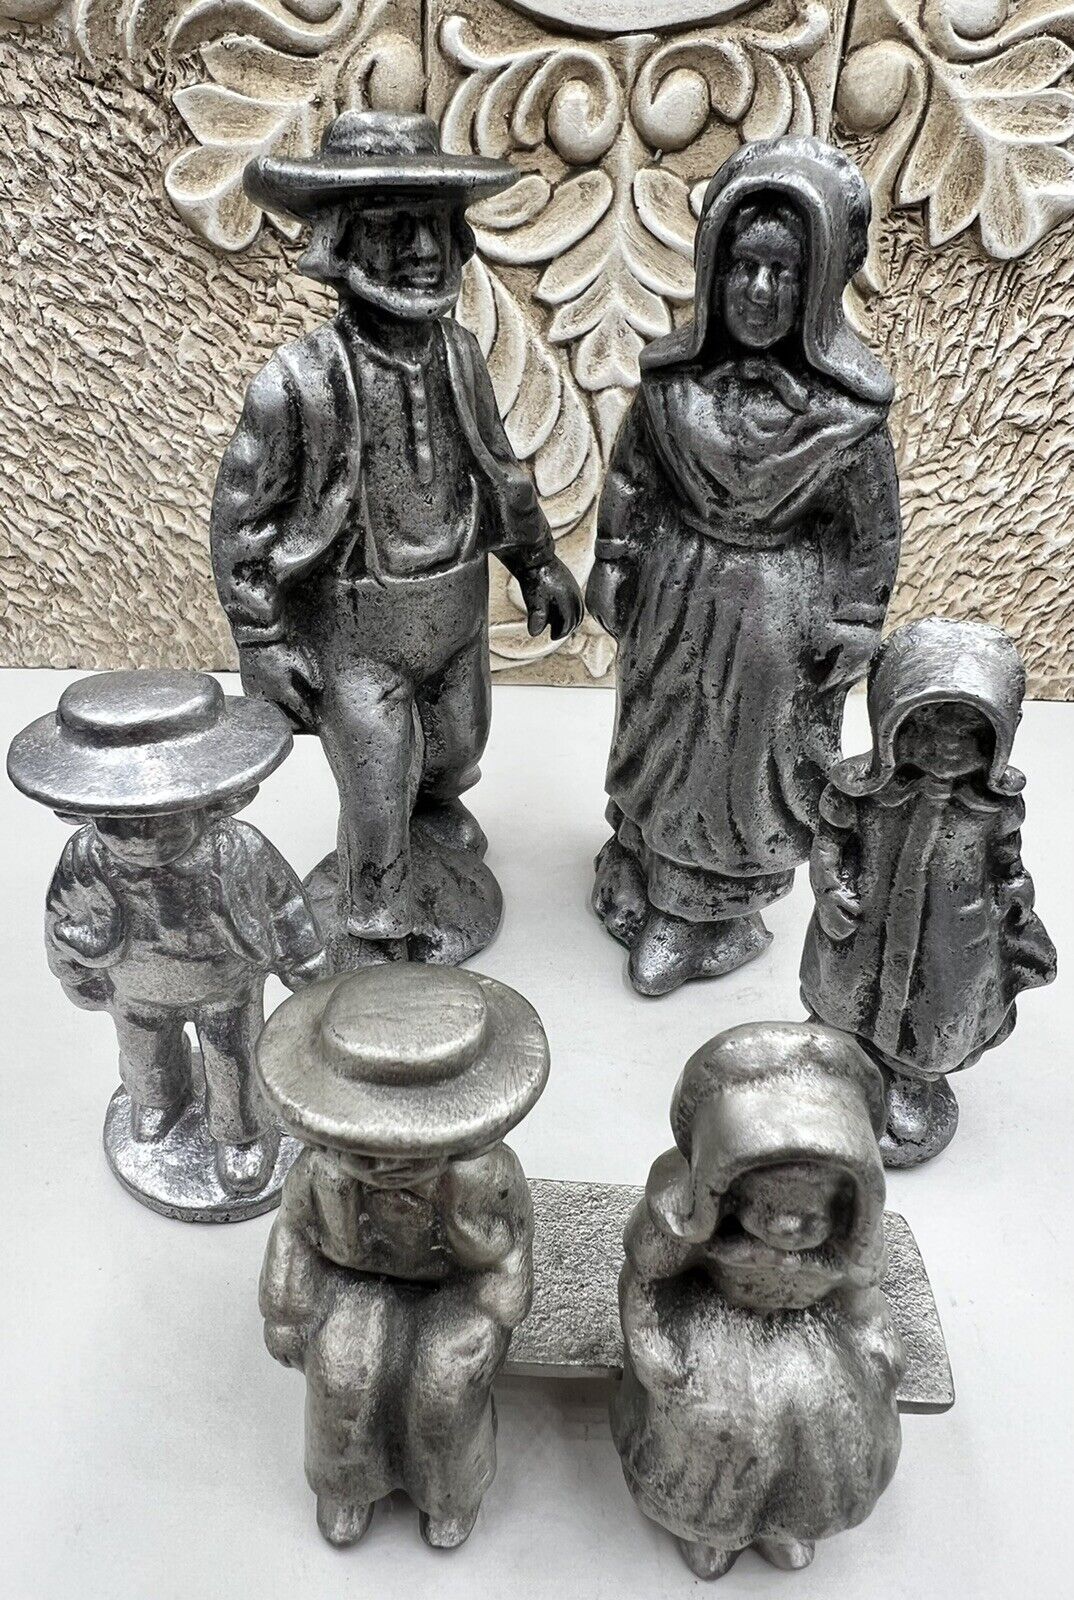 Antique Complete Amish Figurines Family Pewter Collectible Mom Dad Kids